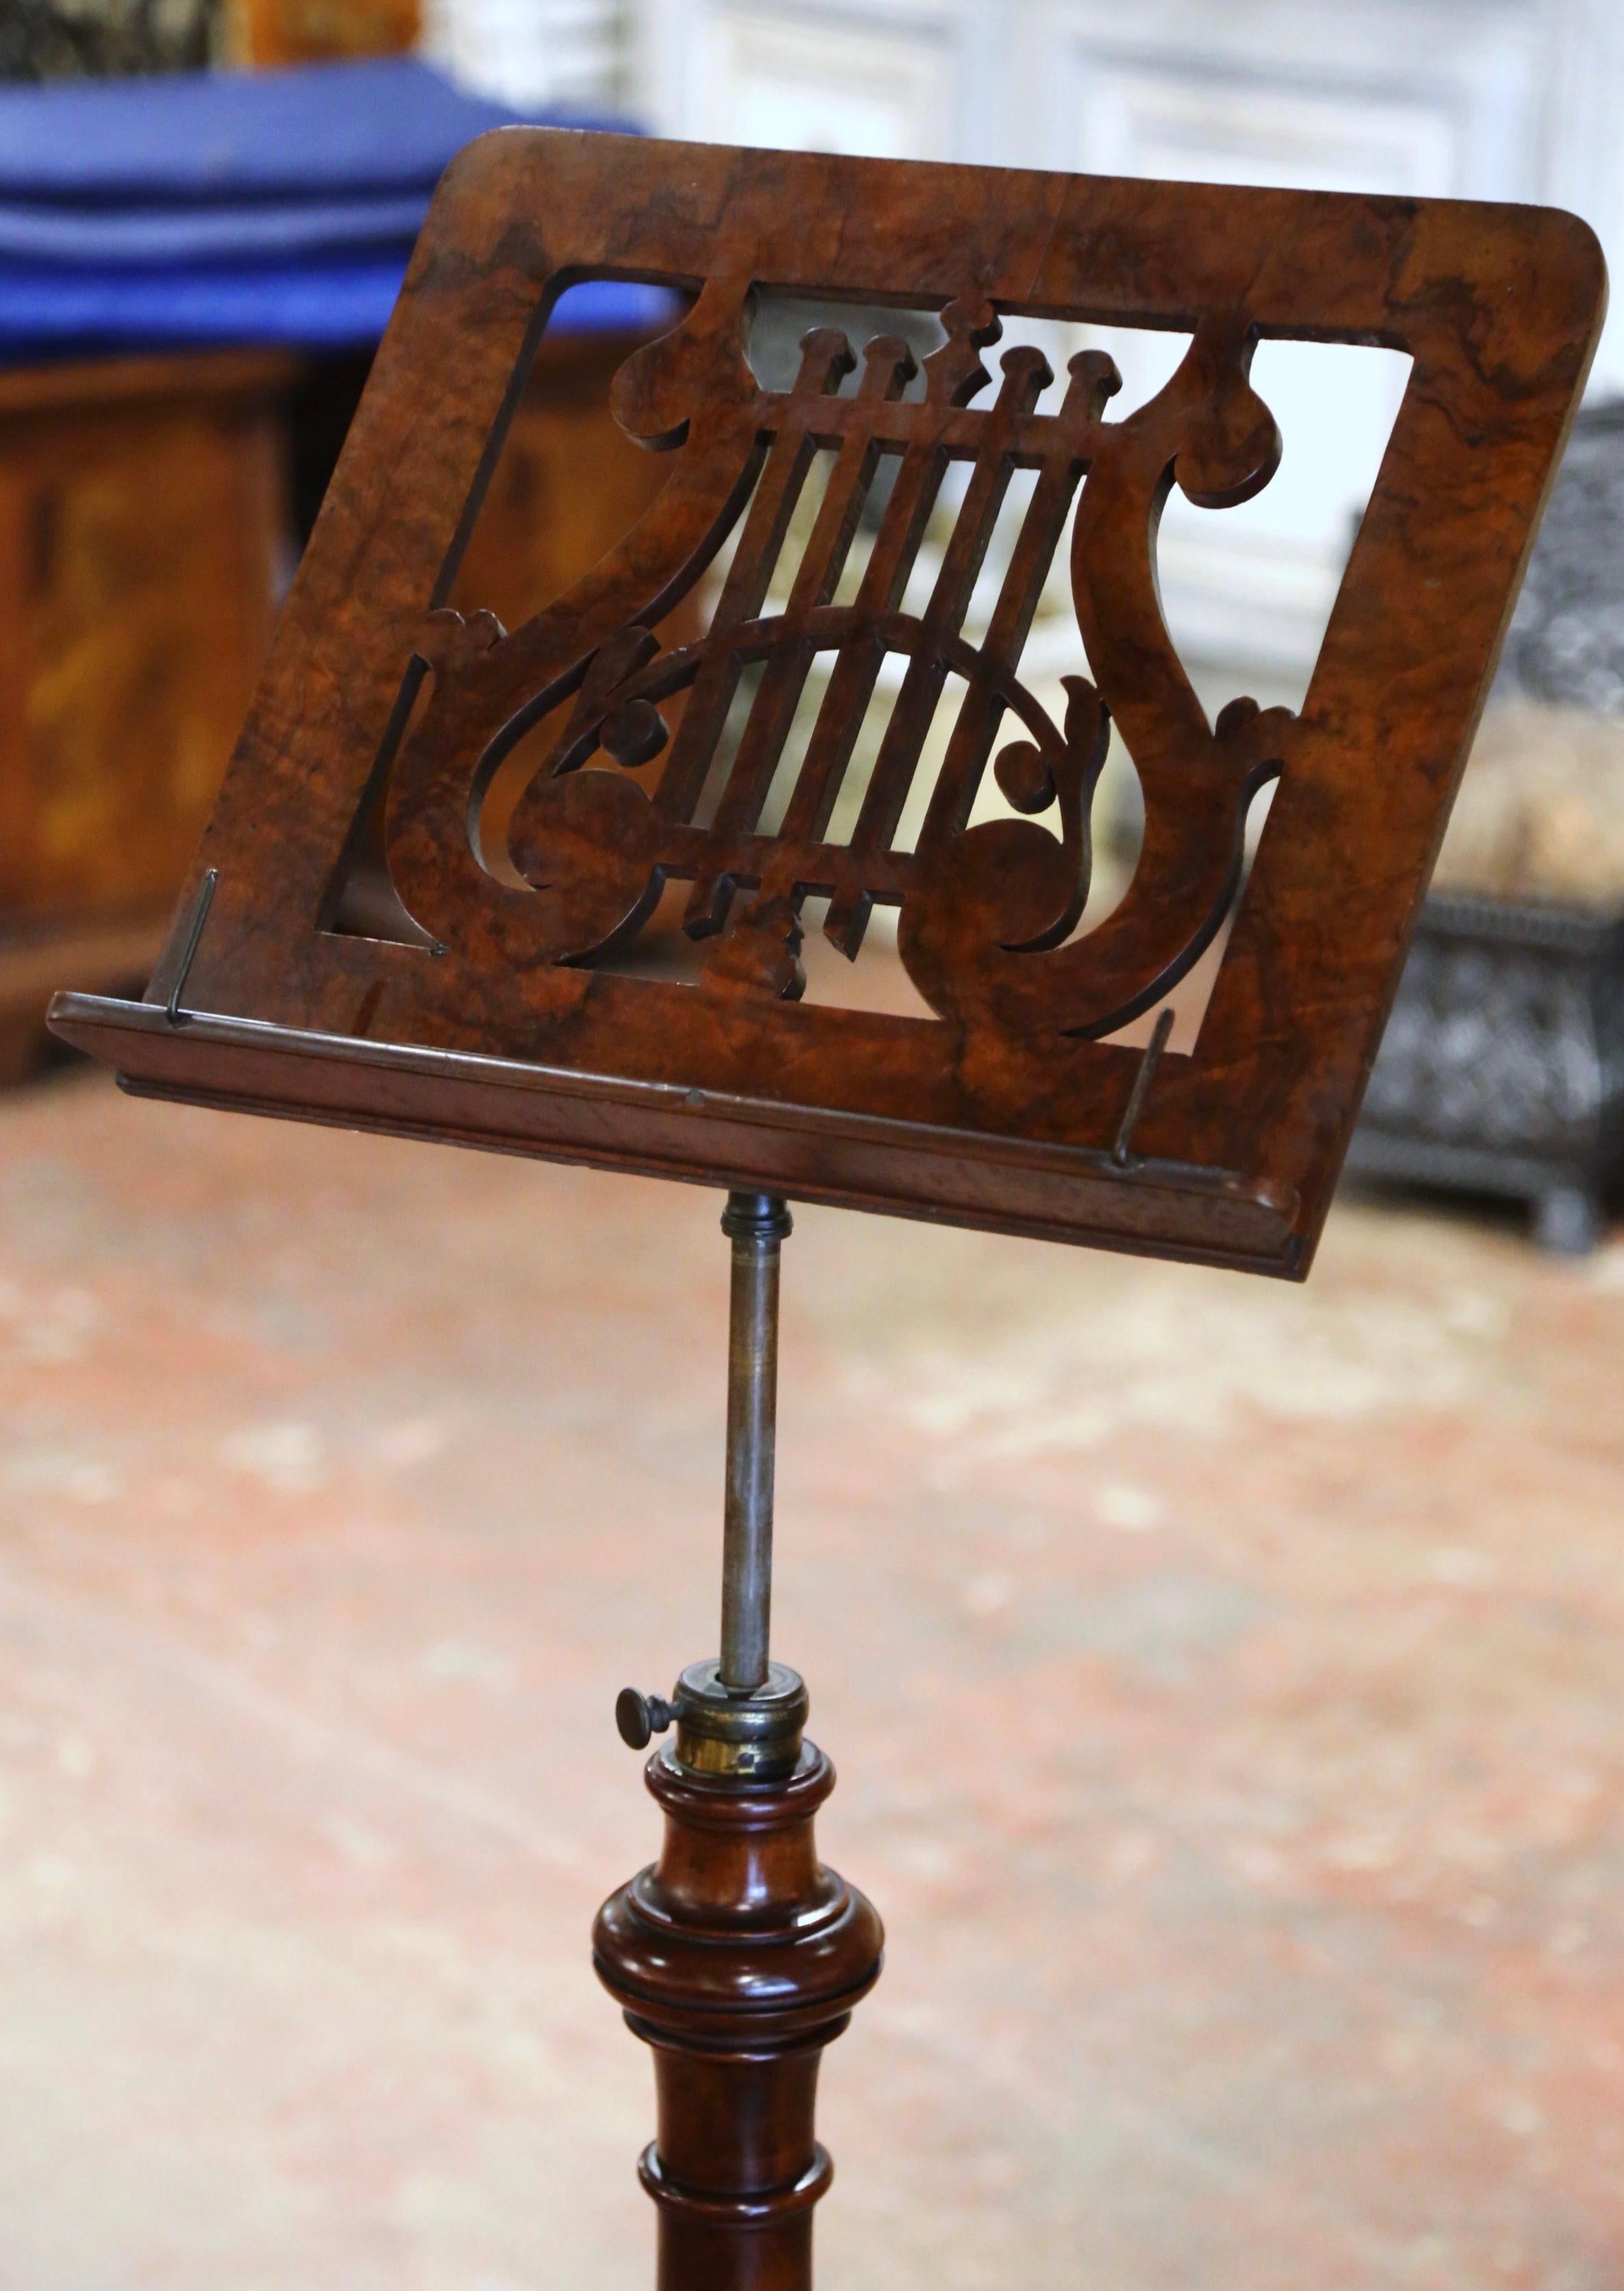 Hand-Carved 19th-Century English Mahogany Music Stand on Wheels with Pierced Lyre Motif